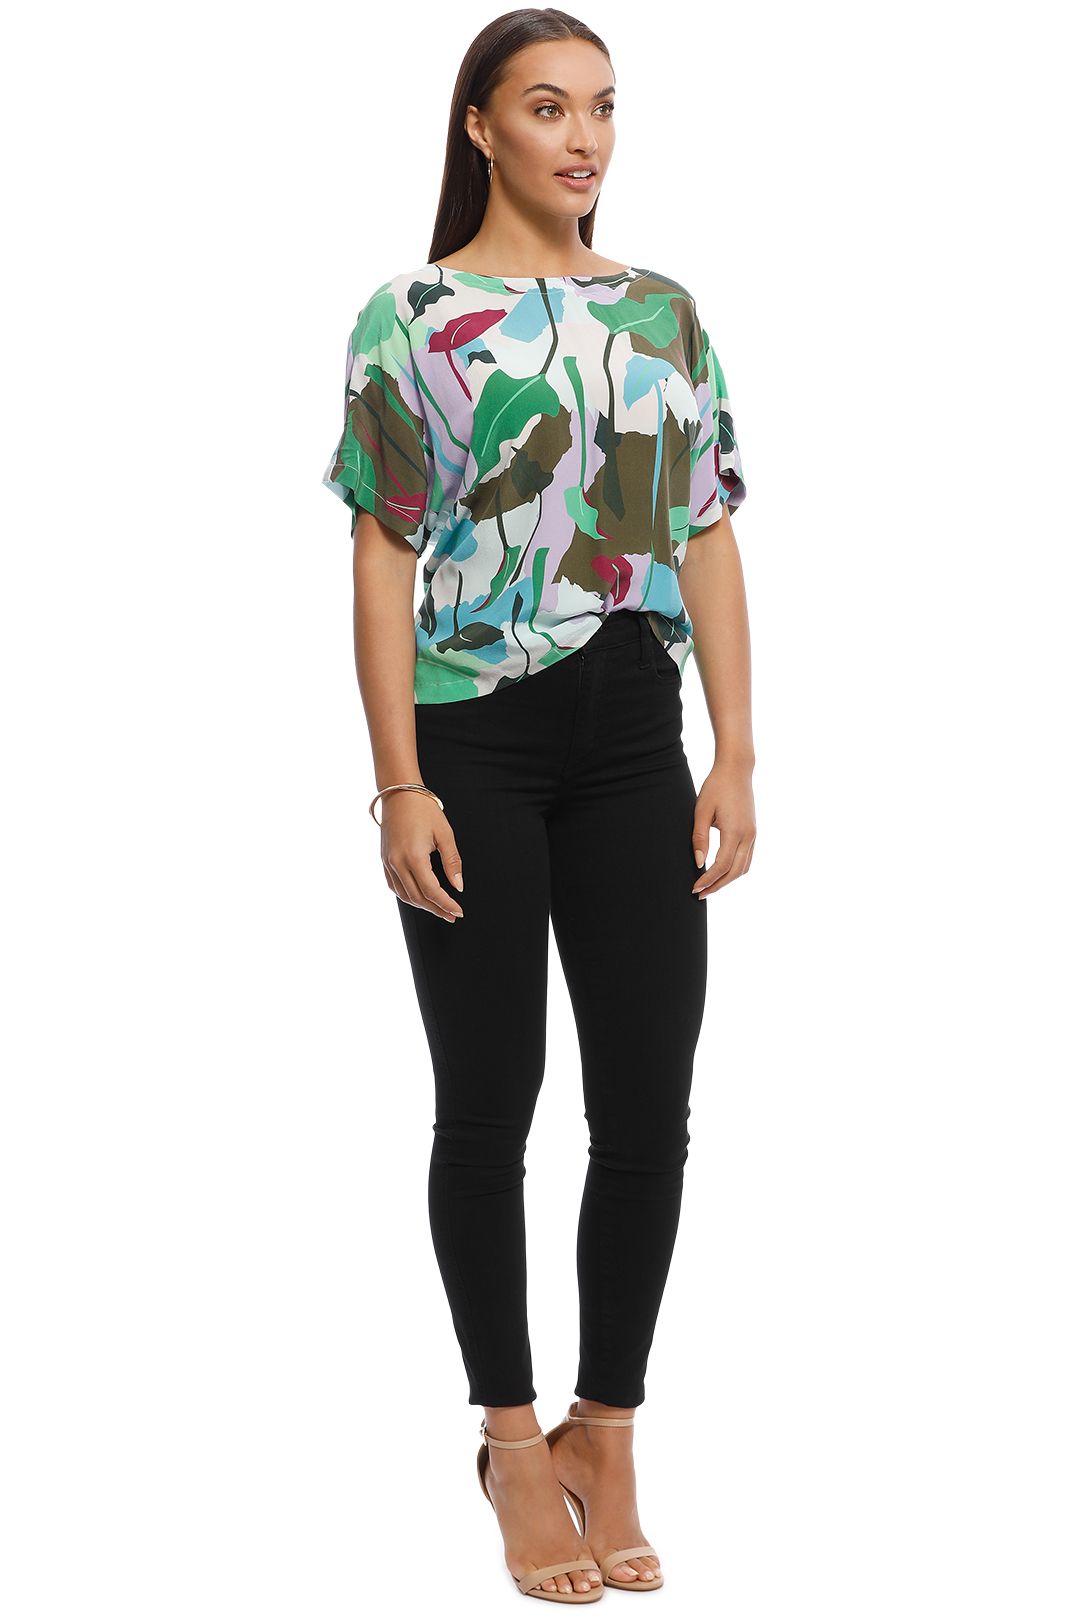 Gorman - Philodendron Silk Top - Multi - Side